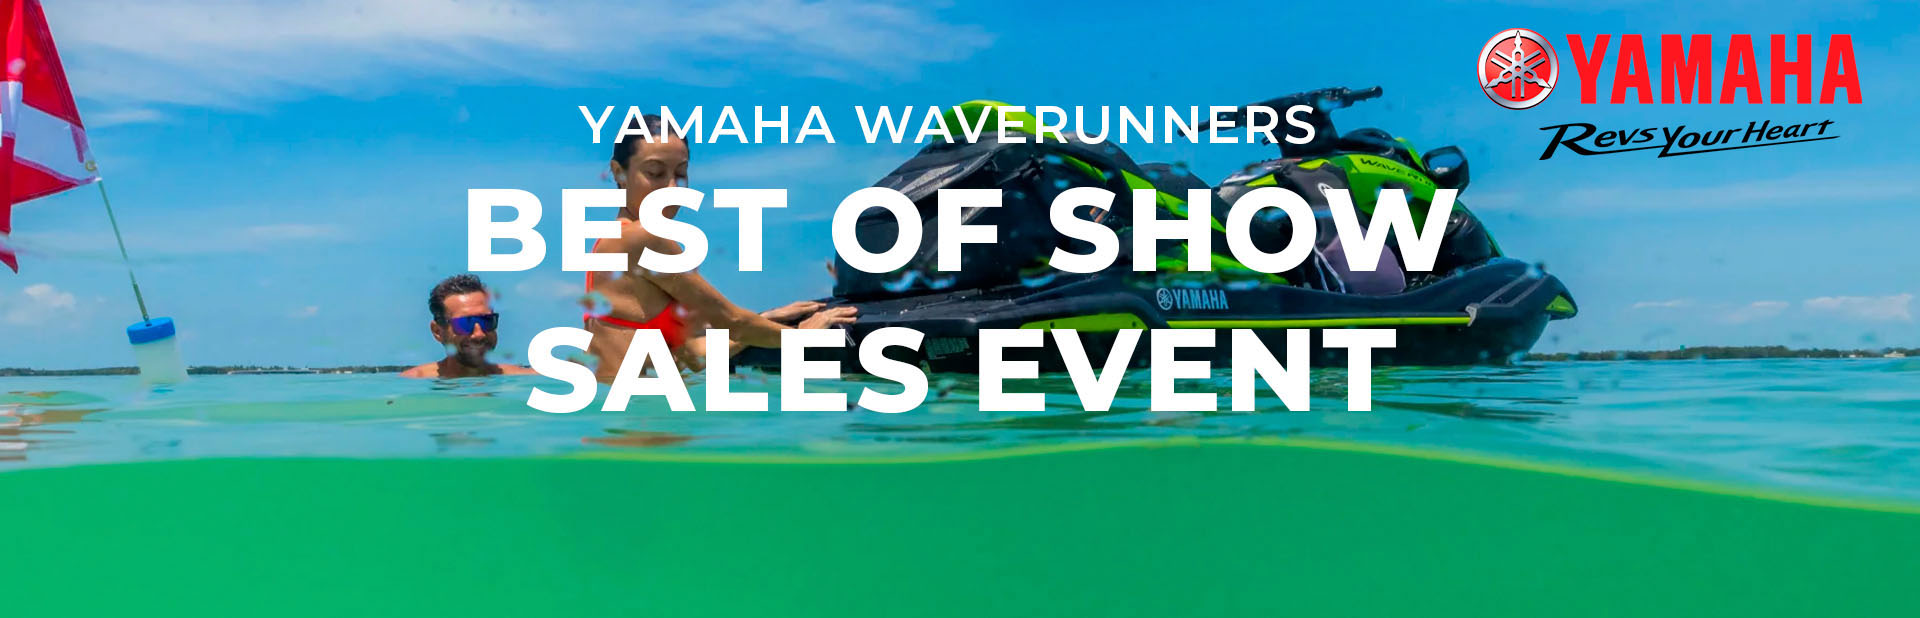 BEST OF SHOW SALES EVENT